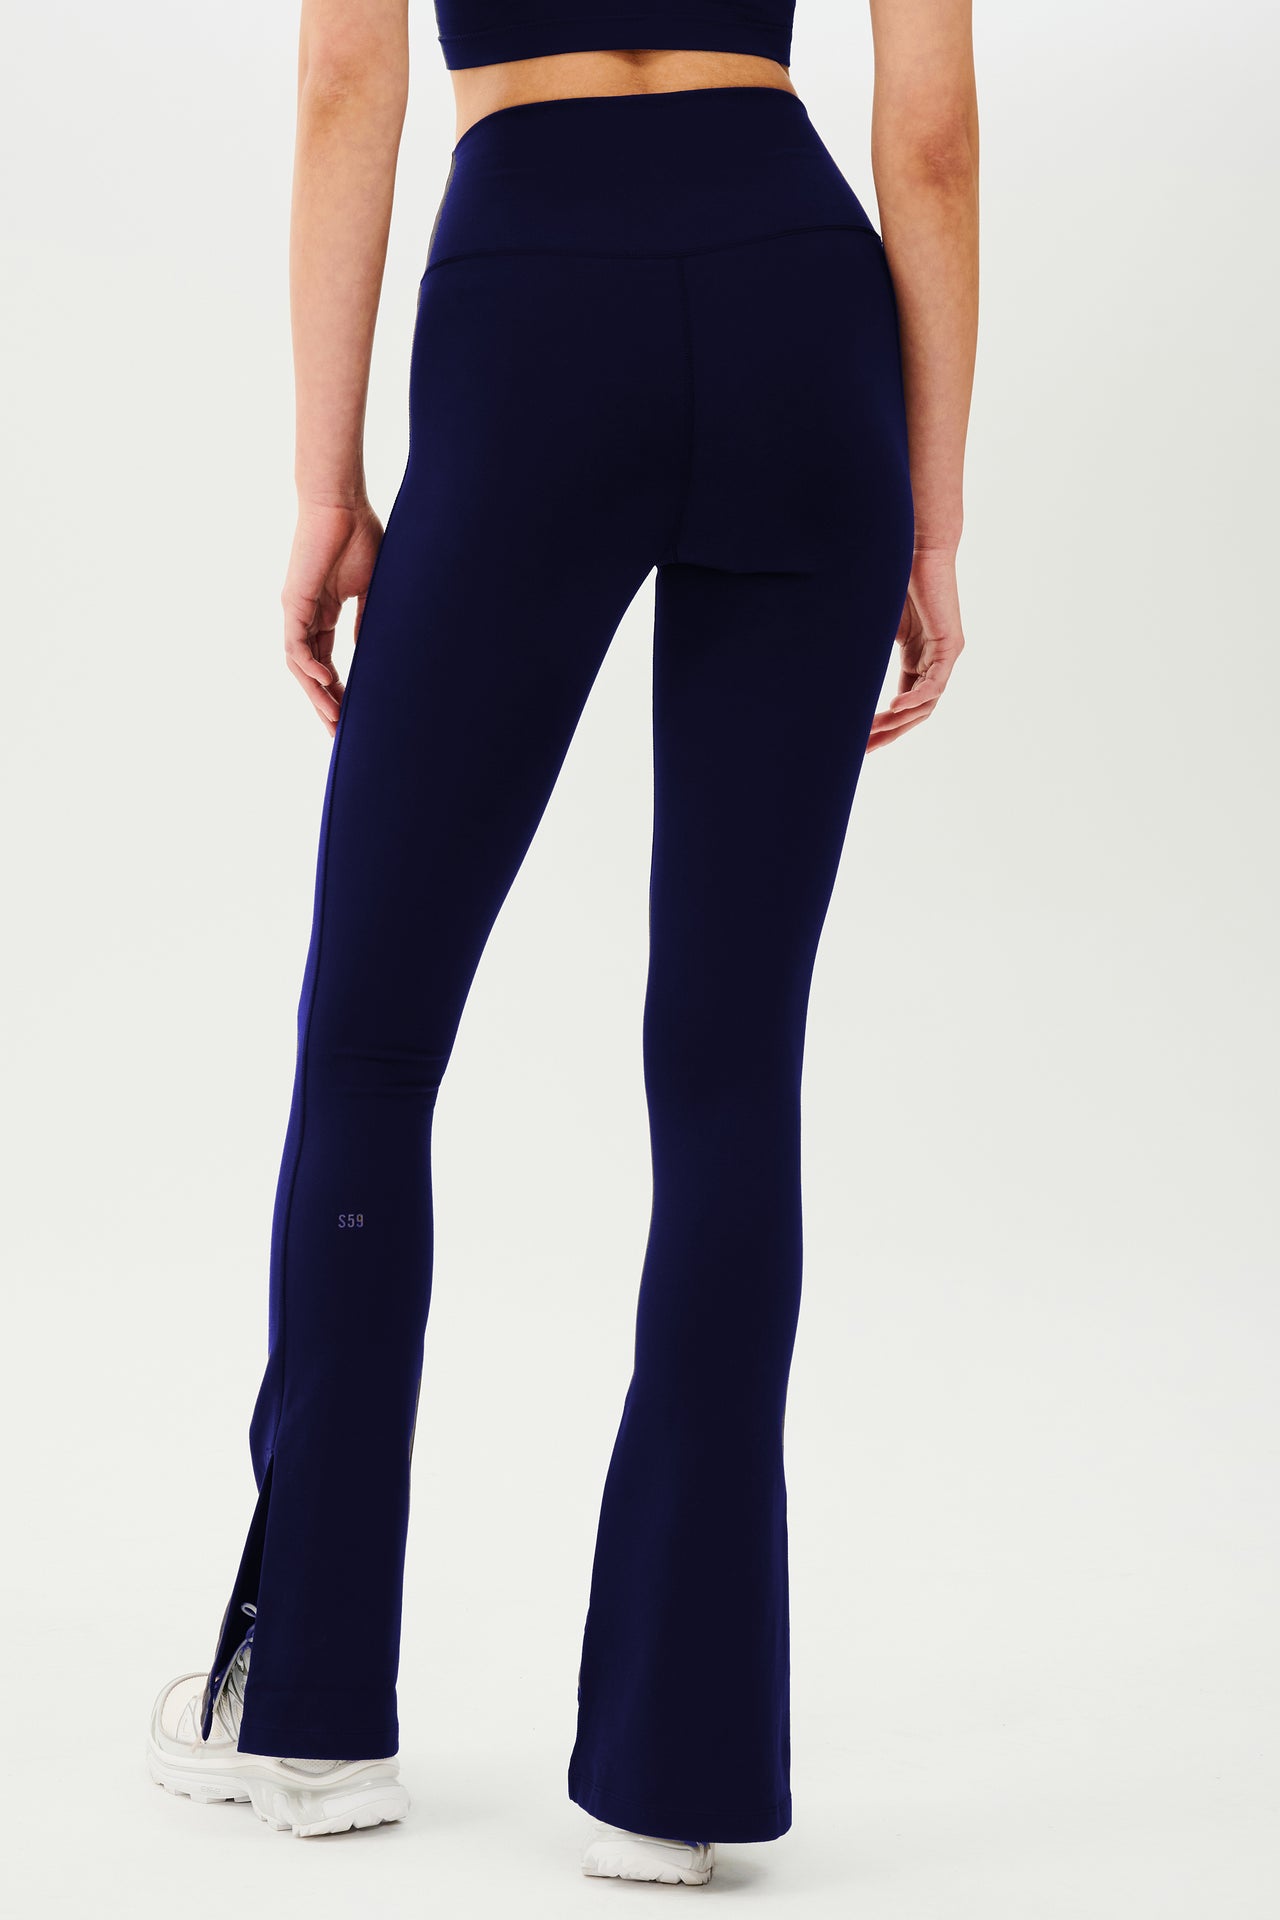 The back view of a woman wearing SPLITS59 Raquel High Waist Flare w/ Split Hem - Indigo leggings designed for workouts with 4-way stretch capability.